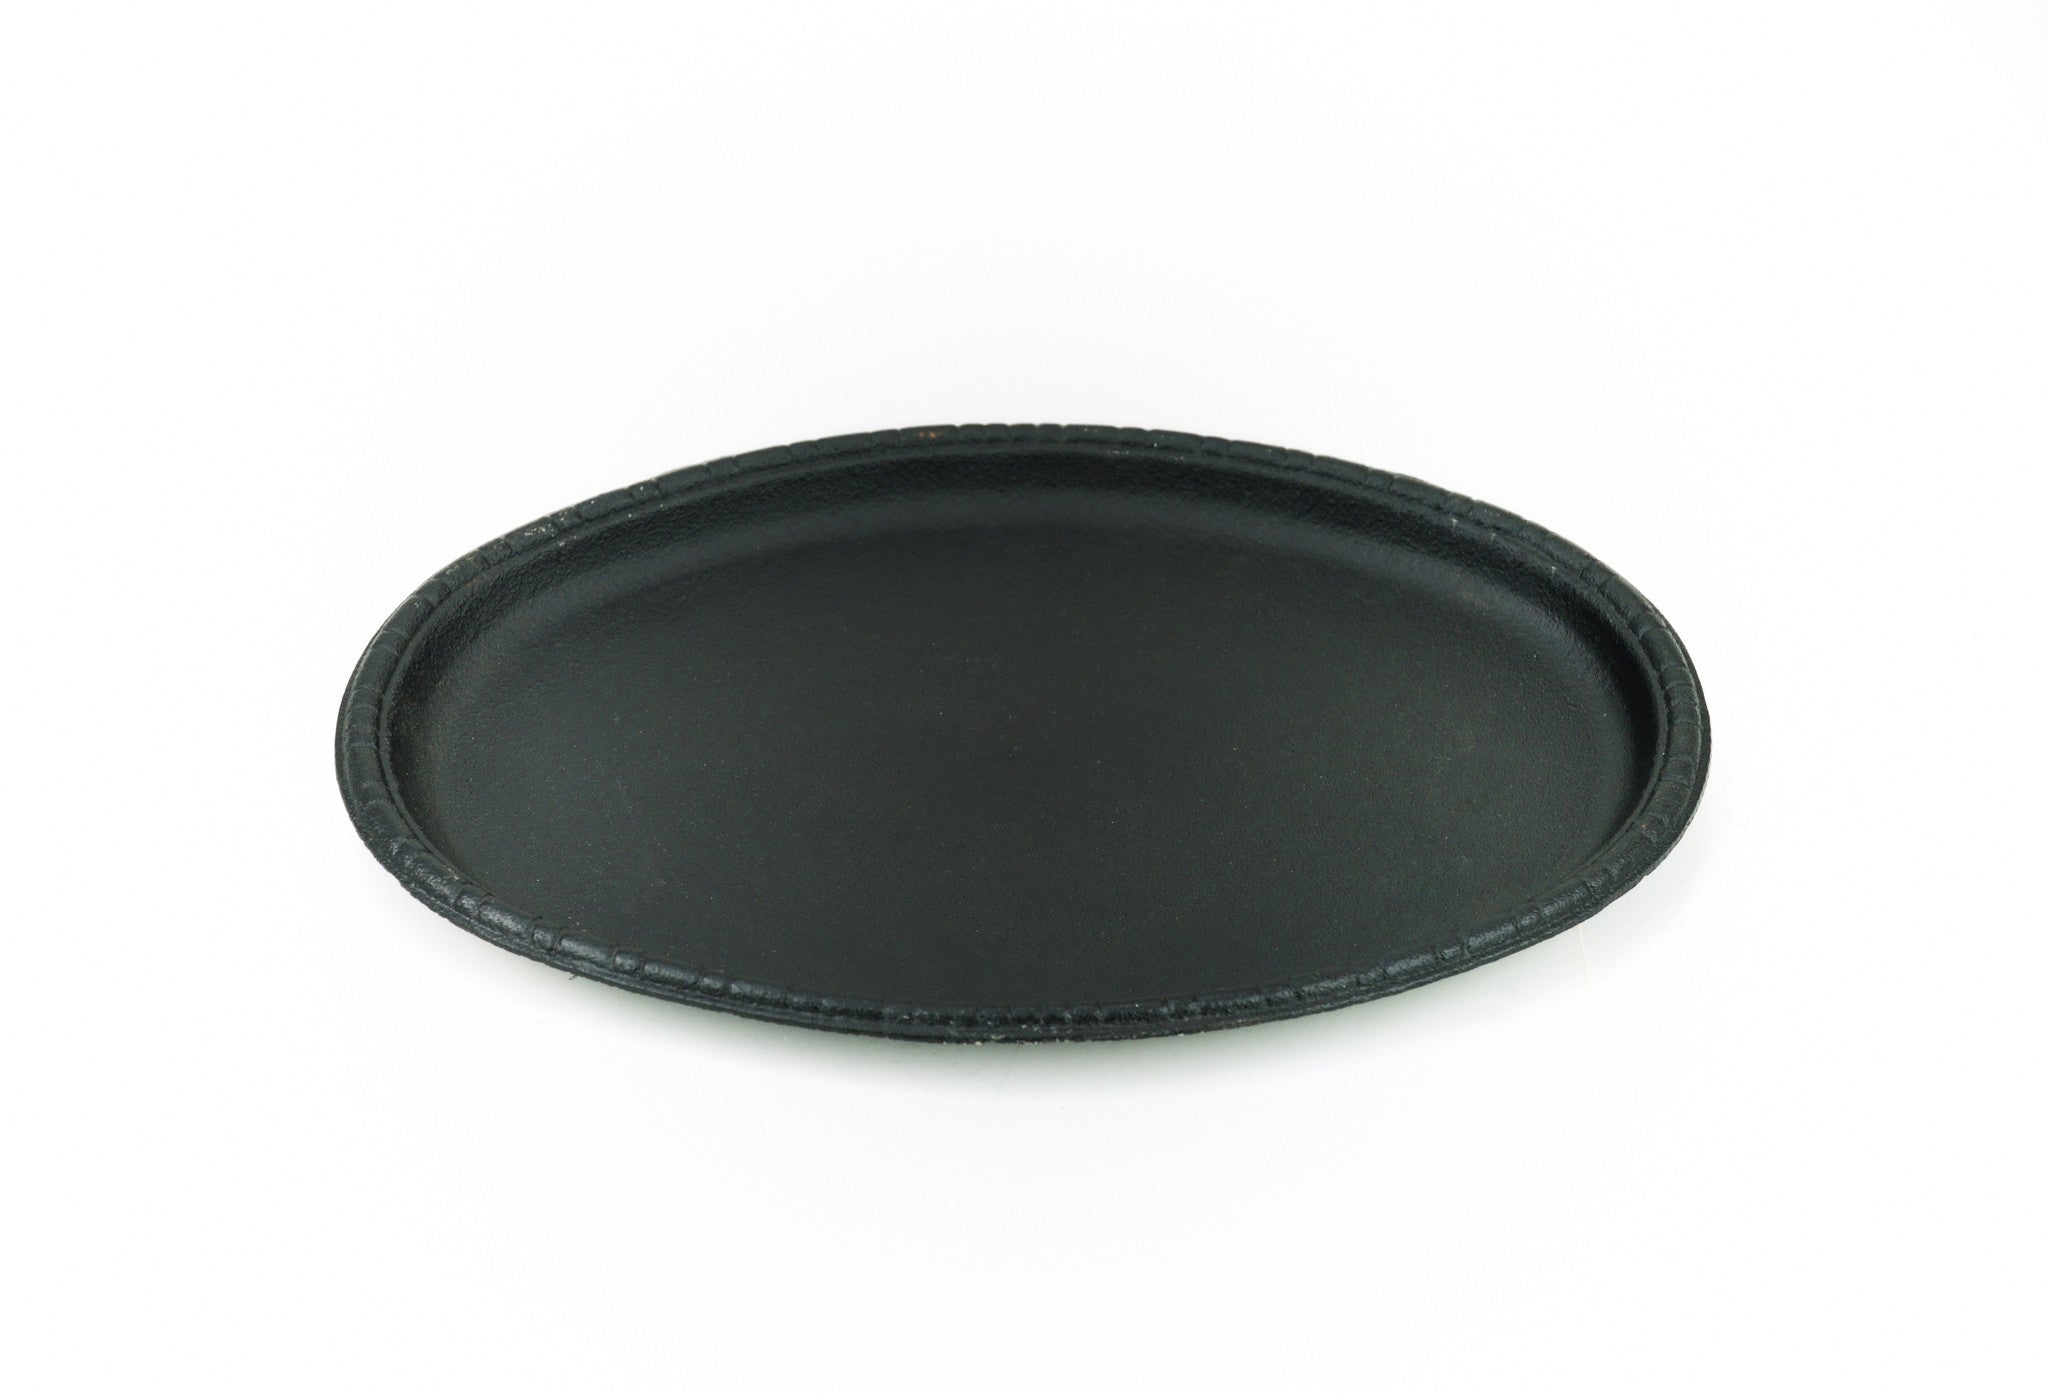 Korean Cast Iron Barbecue Sizzling Plate, Oval 타원 무쇠 판 – eKitchenary